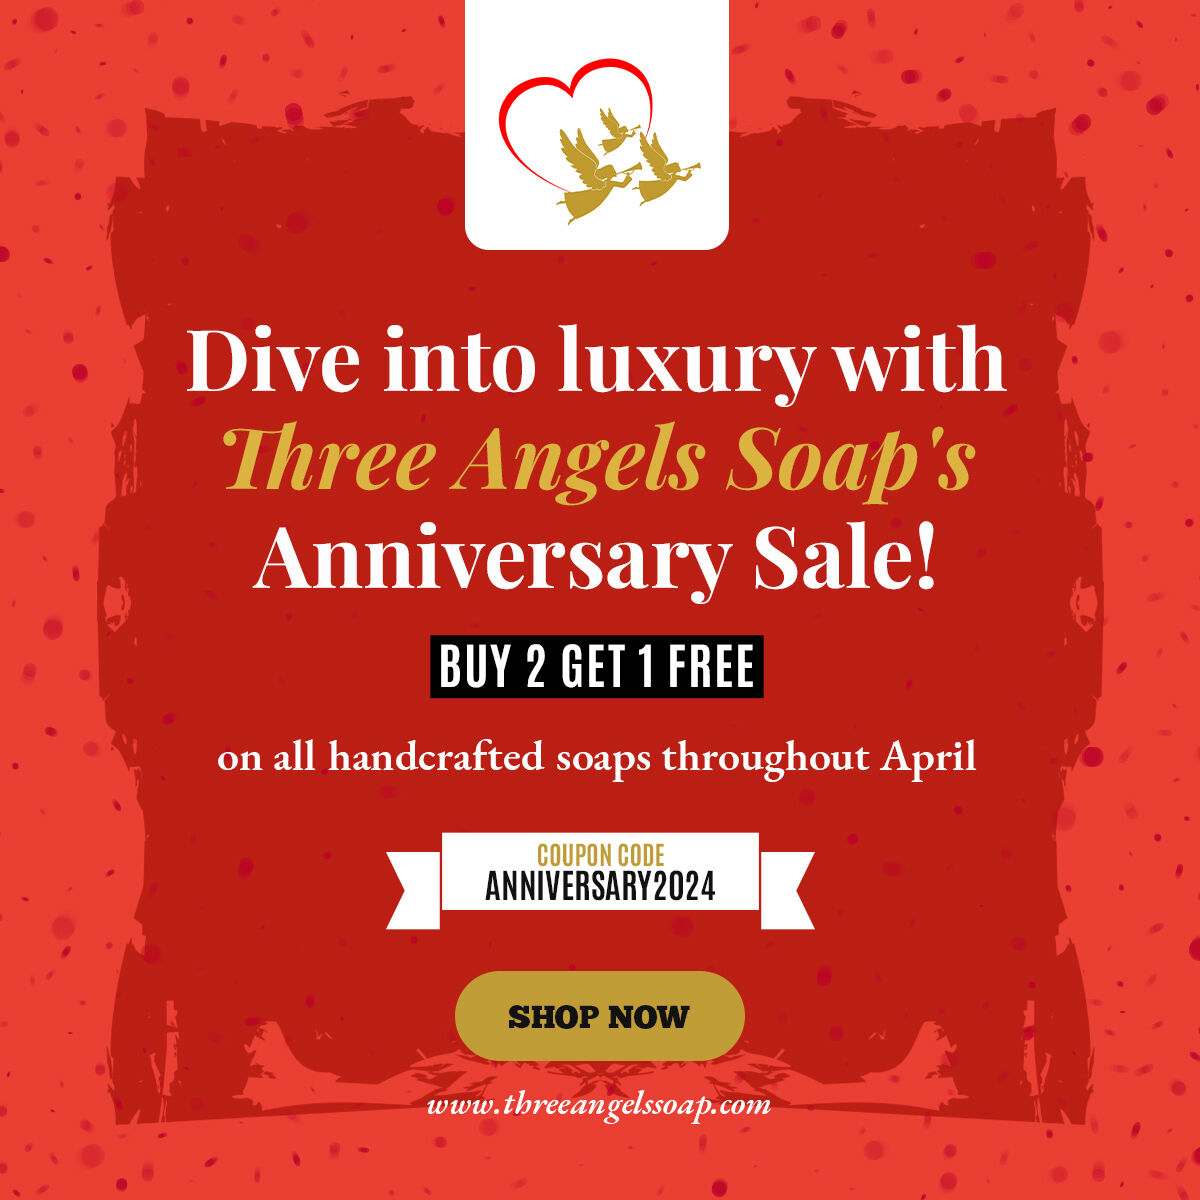 🎉✨ Exciting News! Three Angels Soap is turning another fabulous year older, and we're celebrating with a bang! 🎊 Join us in commemorating our Anniversary Sale throughout the entire month of April! 🌟

Coupon Code: Anniversary2024

#ThreeAngelsAnniversary #Buy2Get1Free